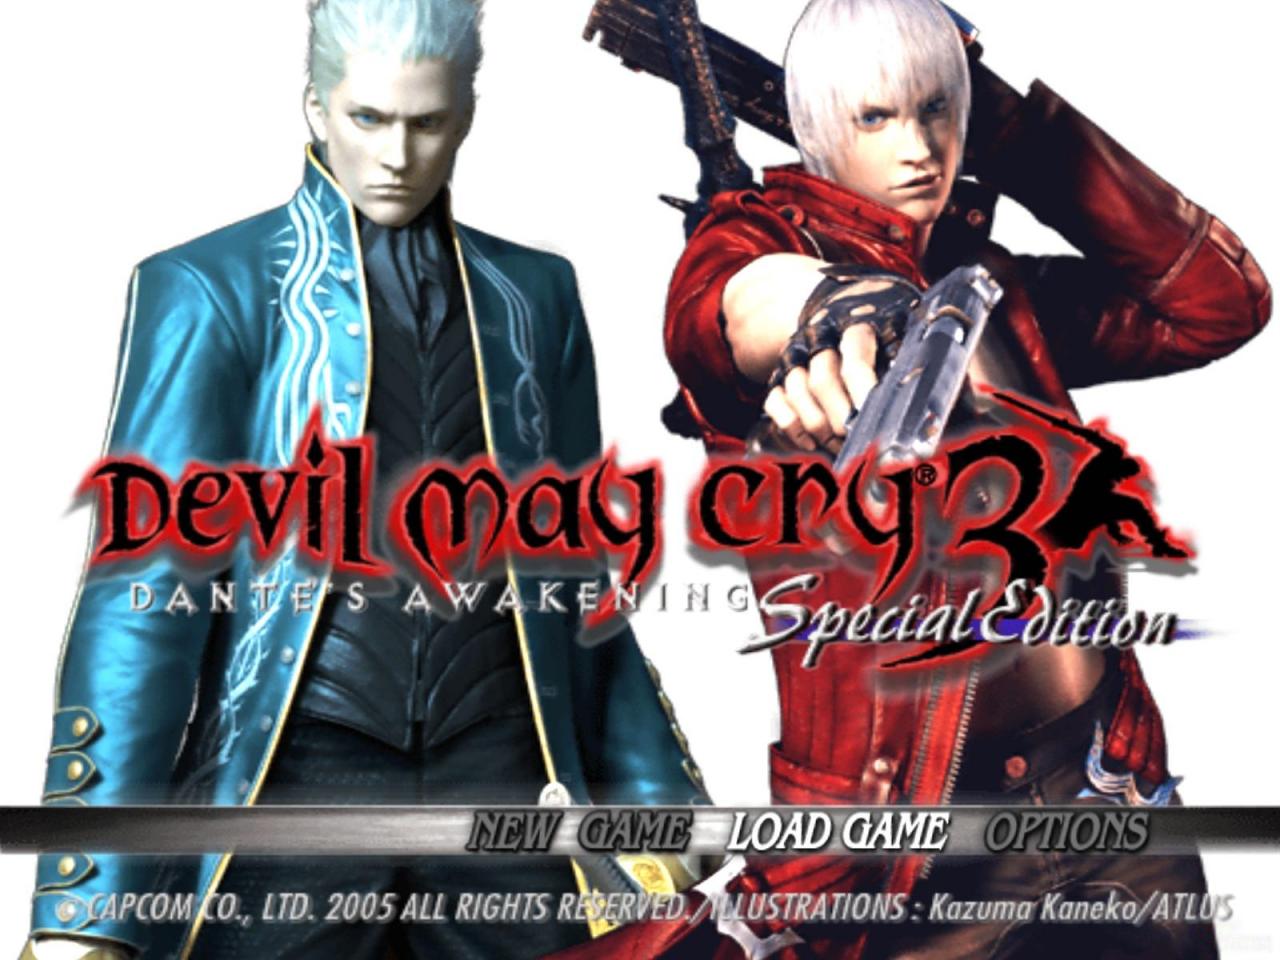 DMC: Devil May Cry Behind the Scenes #3 becoming Dante (PL